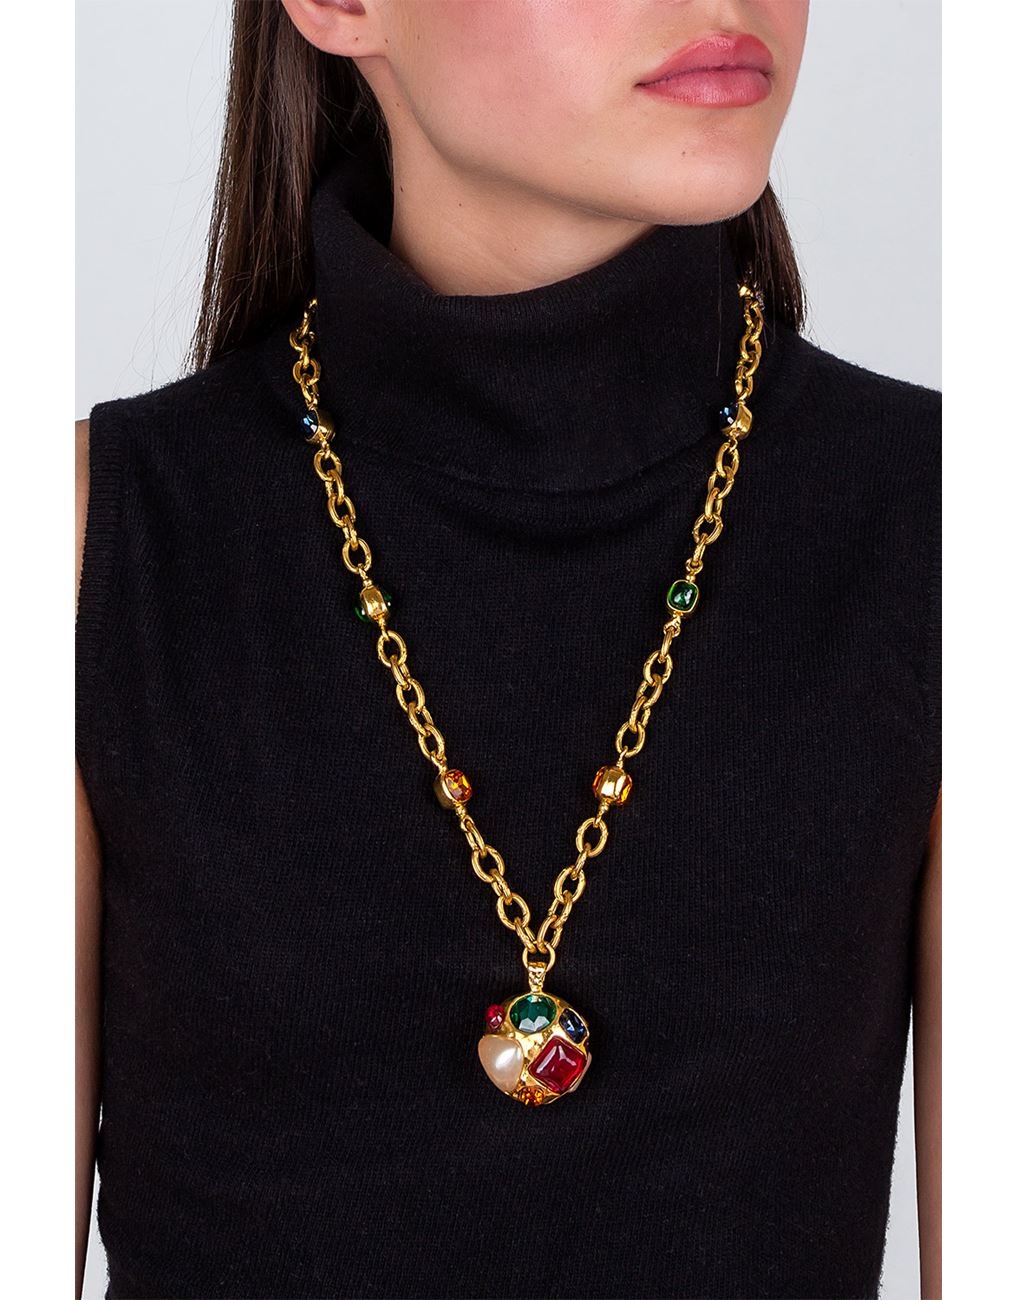 Chanel Gold Long Necklace with Colorful Sphere of Crystals and